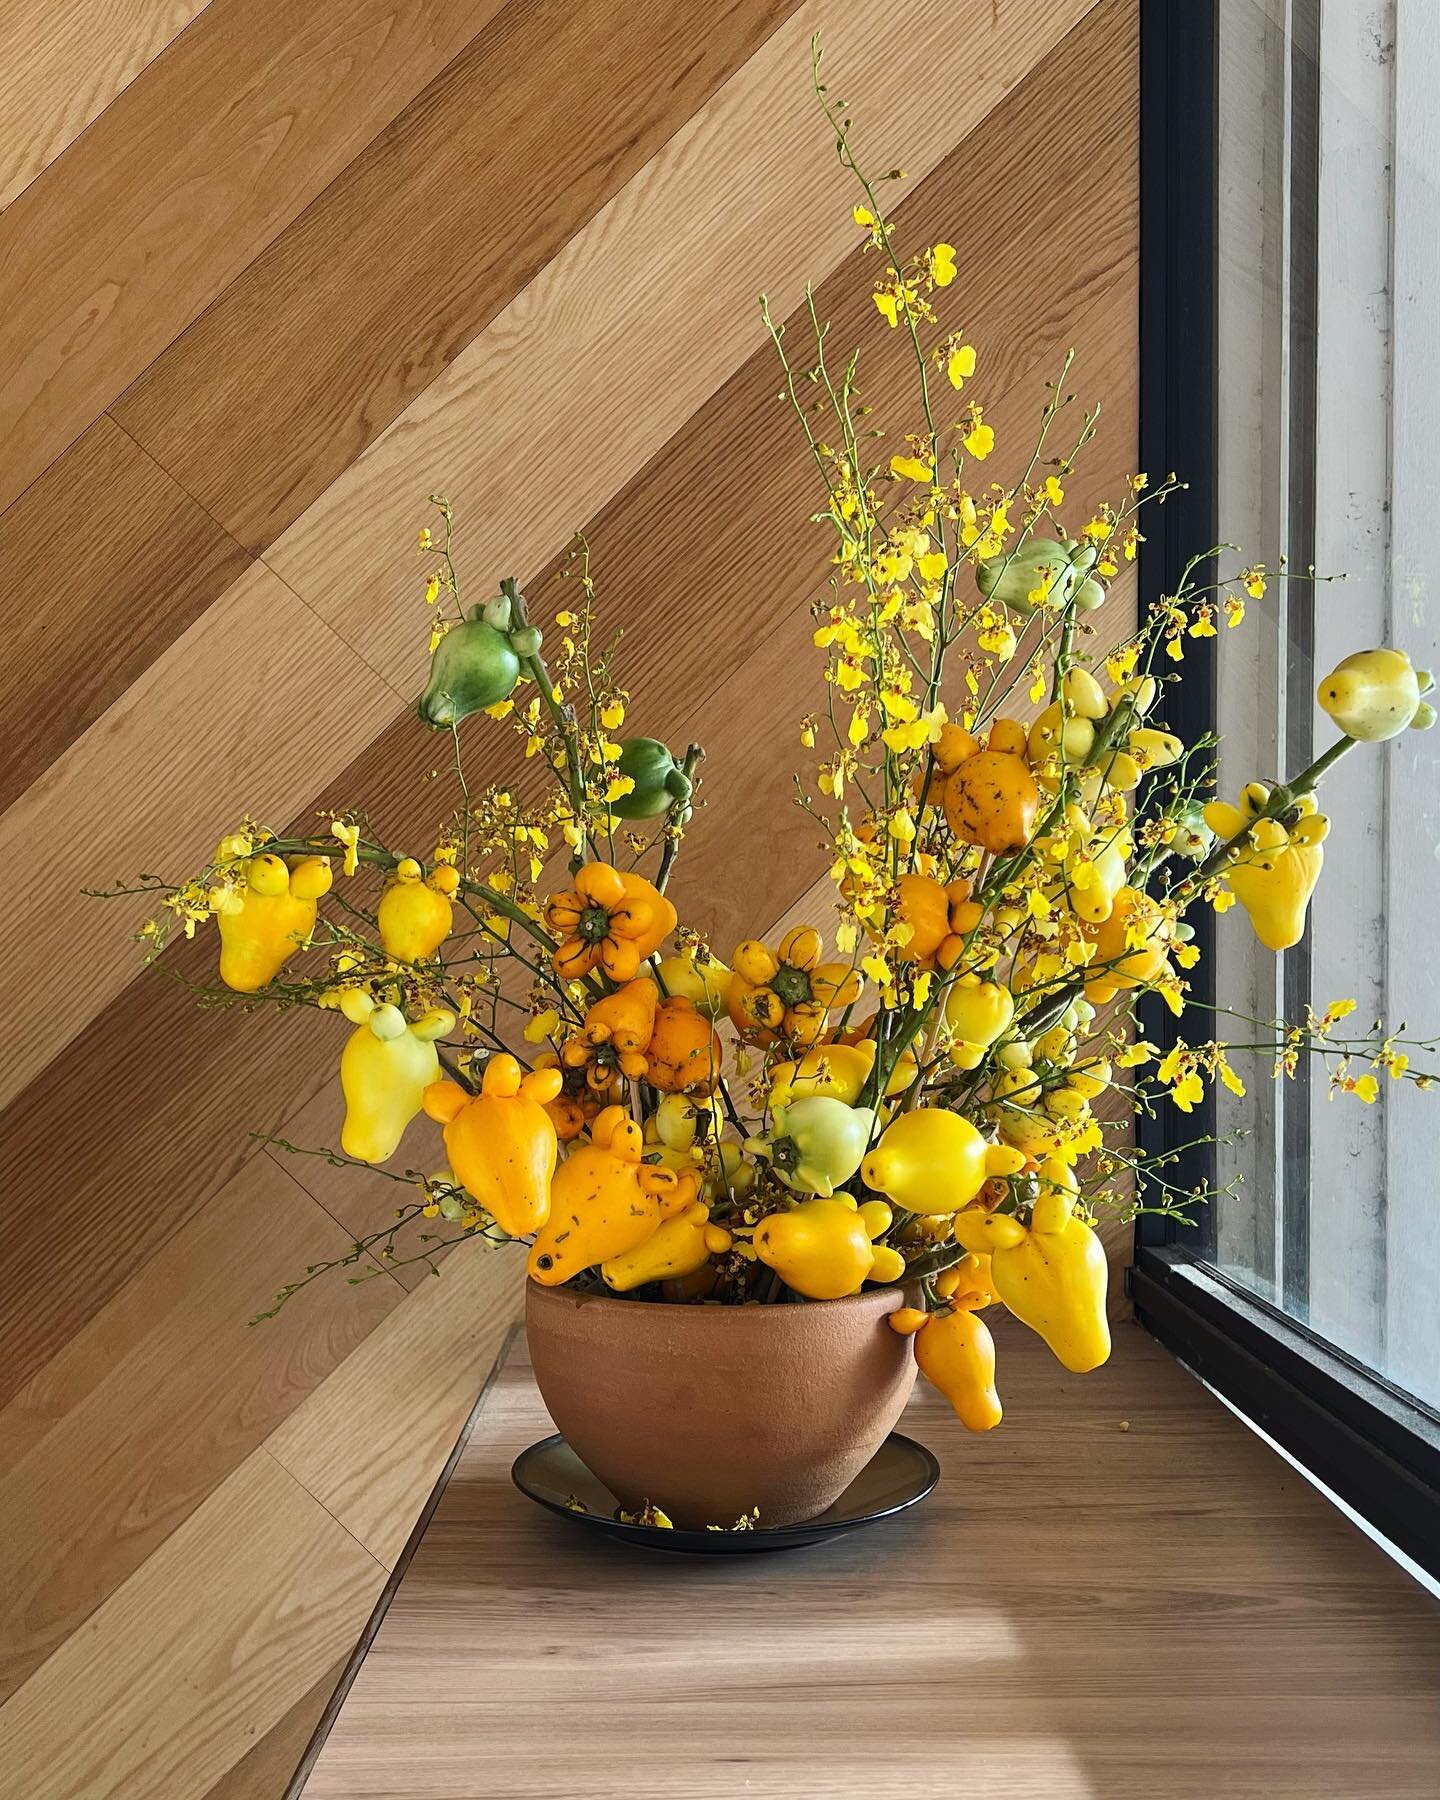 Sharing this beautiful lunar new year arrangement by @whim_and_prayer. 💛

Head to their IG to commission your own bespoke floral arrangement.

On a side note. We&rsquo;ll be taking a short break during the CNY period. 

Close: 21-26 Jan
Business as 